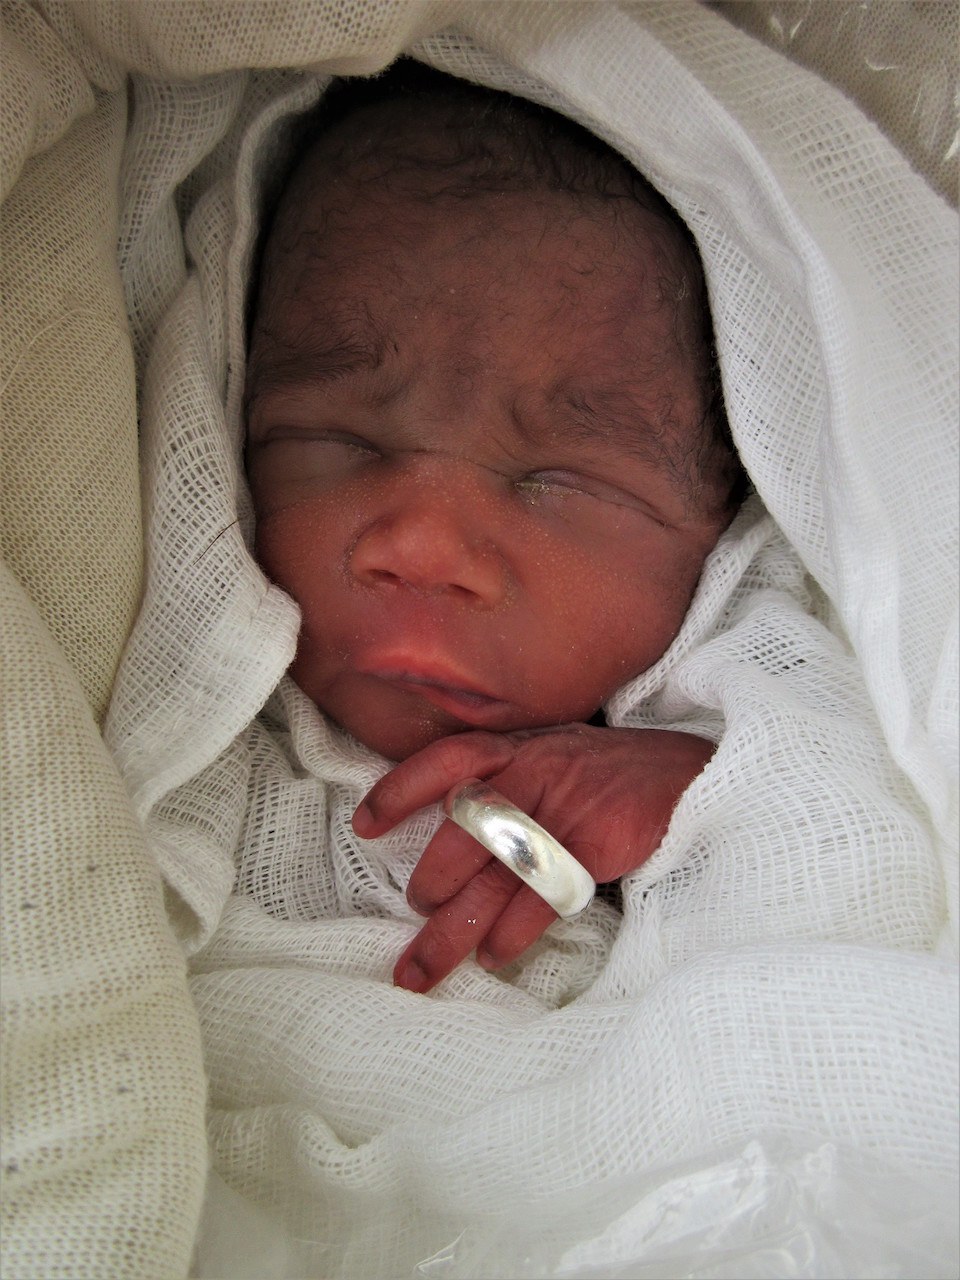 A newborn baby with a wedding ring around her fingers to show how small she is